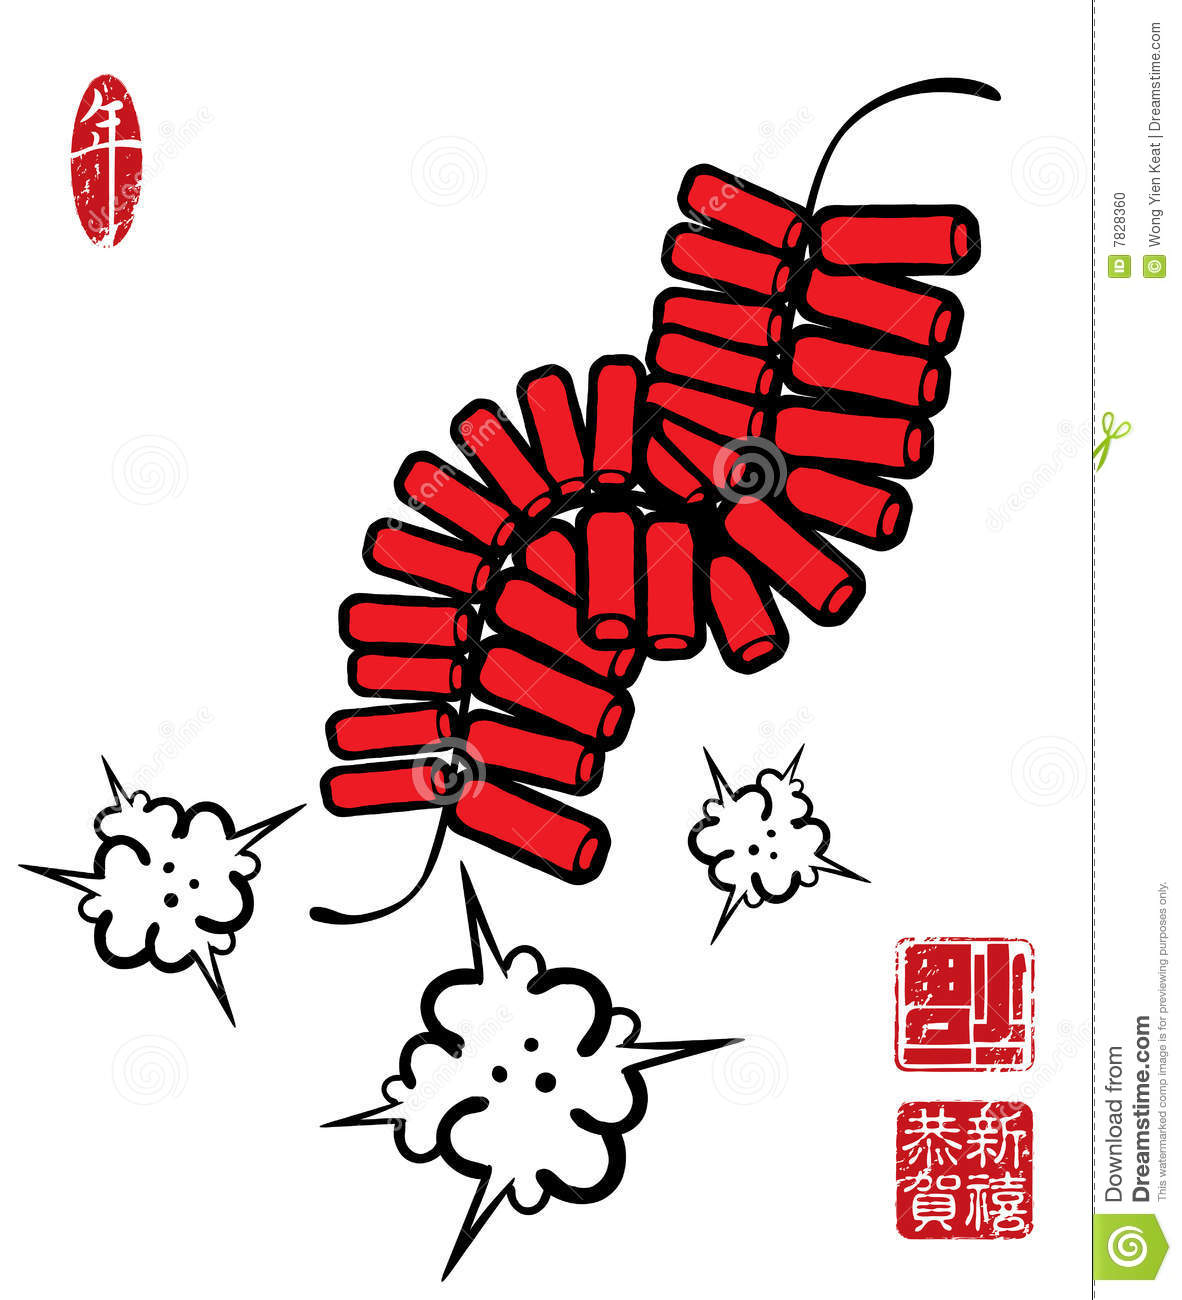 Chinese new year fireworks clipart 1 » Clipart Station.